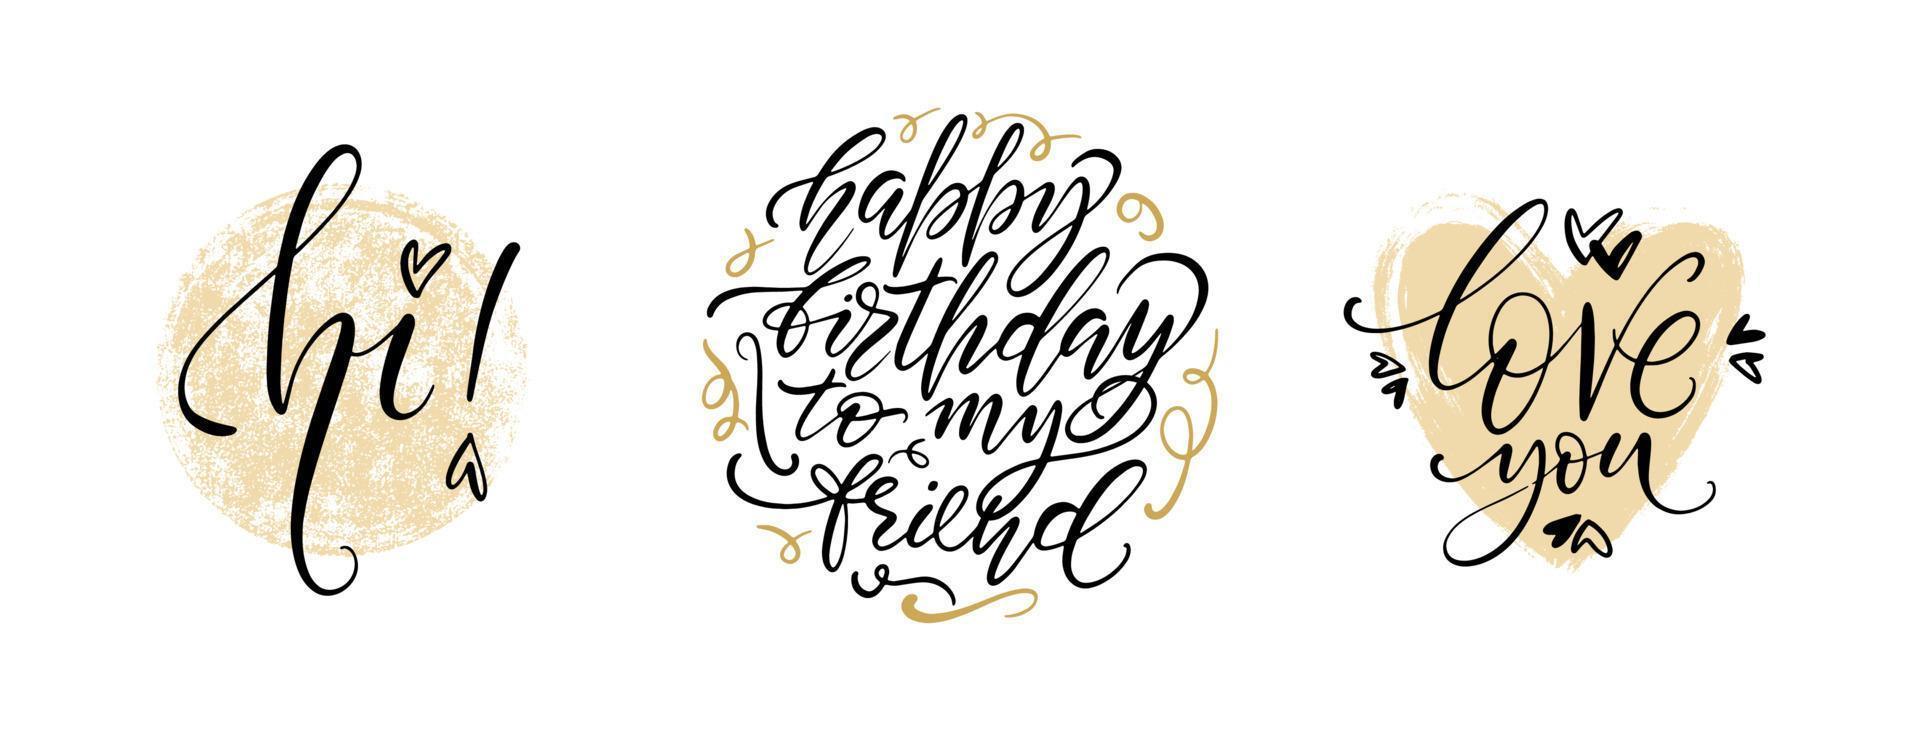 Modern lettering greeting card set. Hi Happy birthday to my friend and Love you words with hearts, backgrounds and decoration on white background. Designs for print, posters, cards. vector